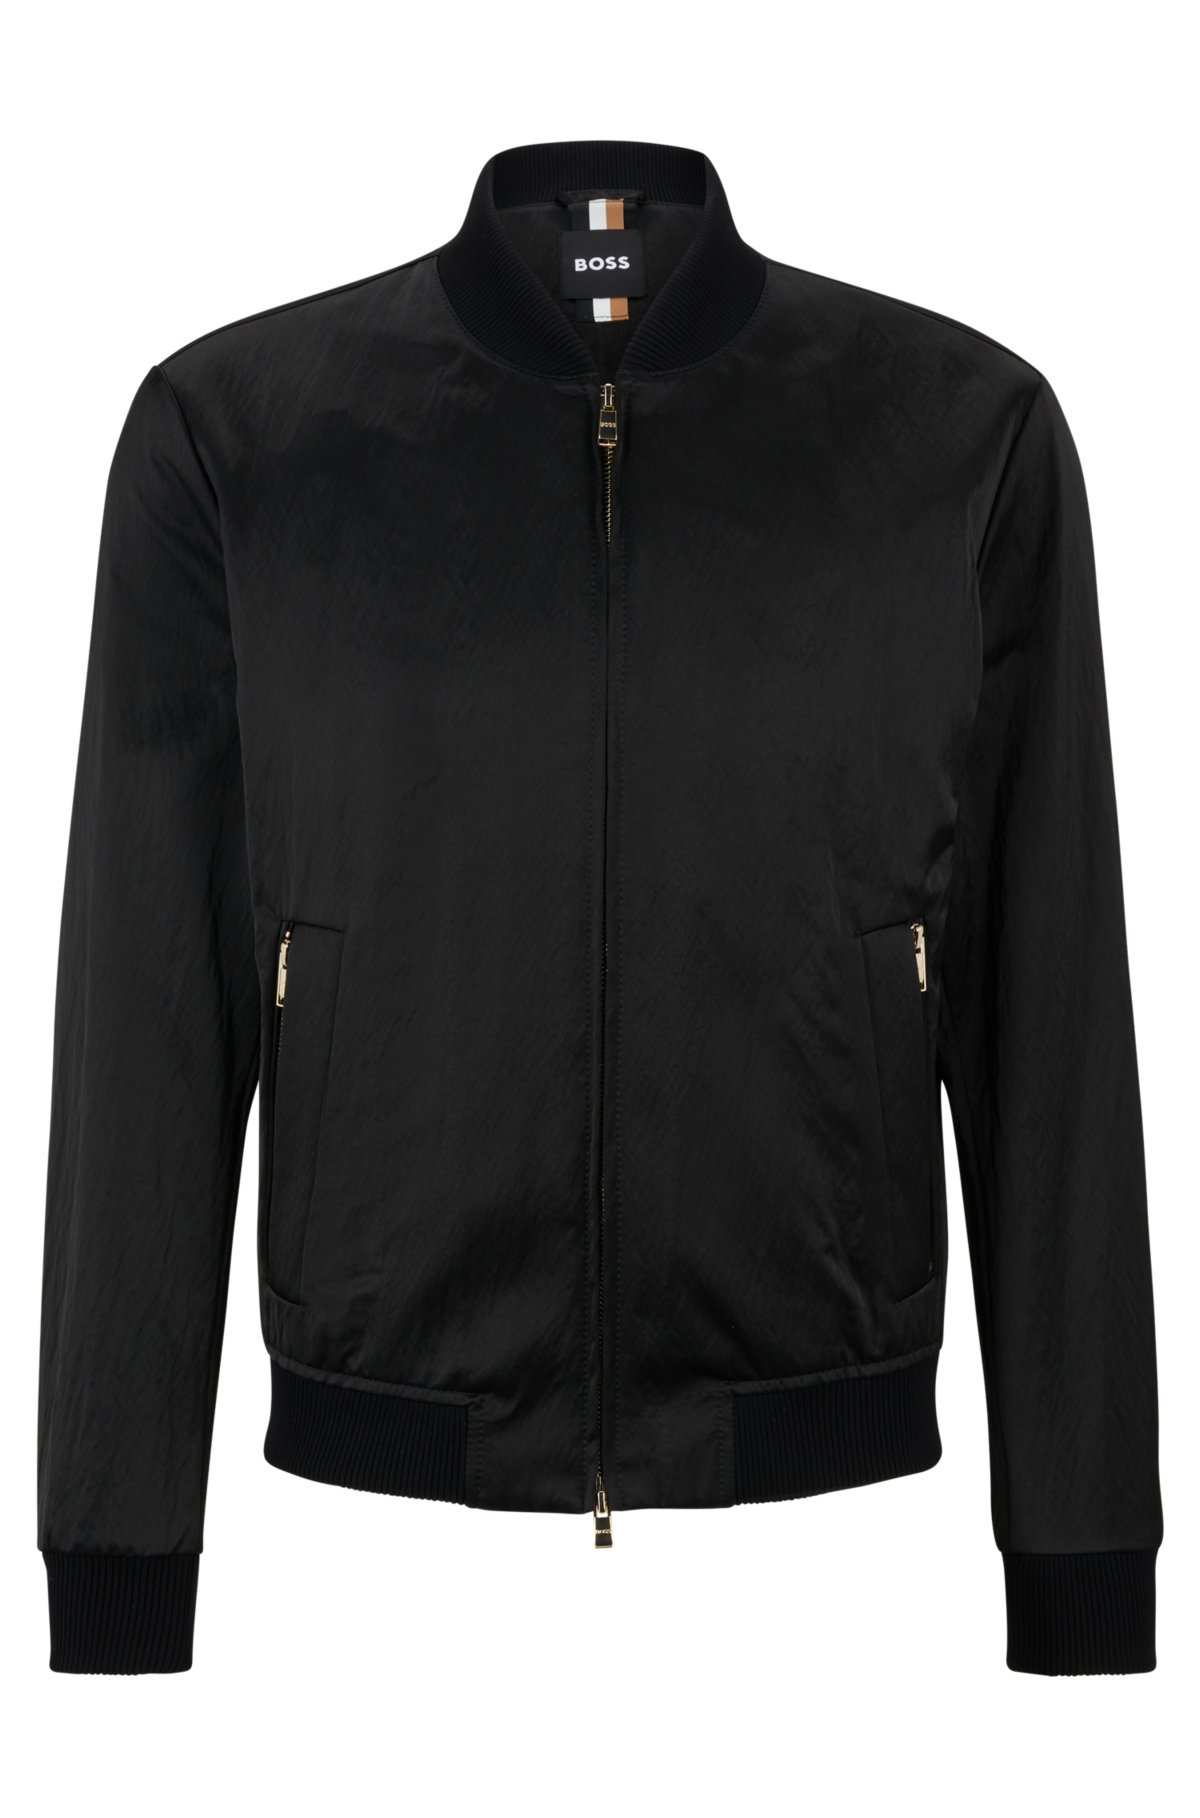 BOSS - Slim-fit zip-up jacket in soft satin